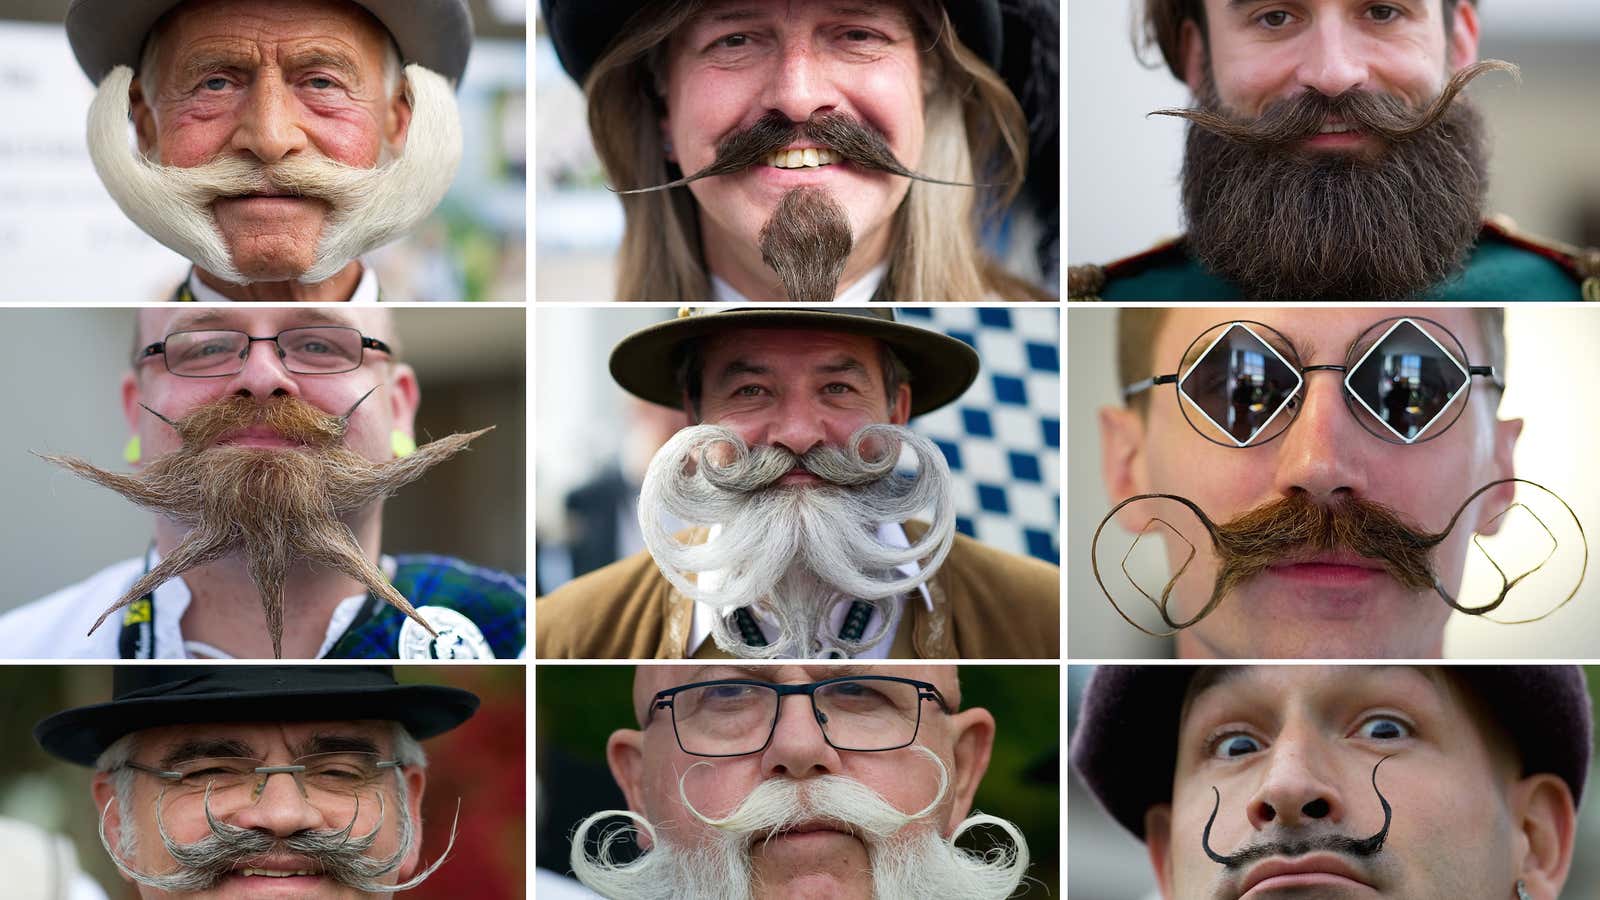 Over 300 men from around the world compete for hirsute supremacy at the World Beard and Mustache Championship.